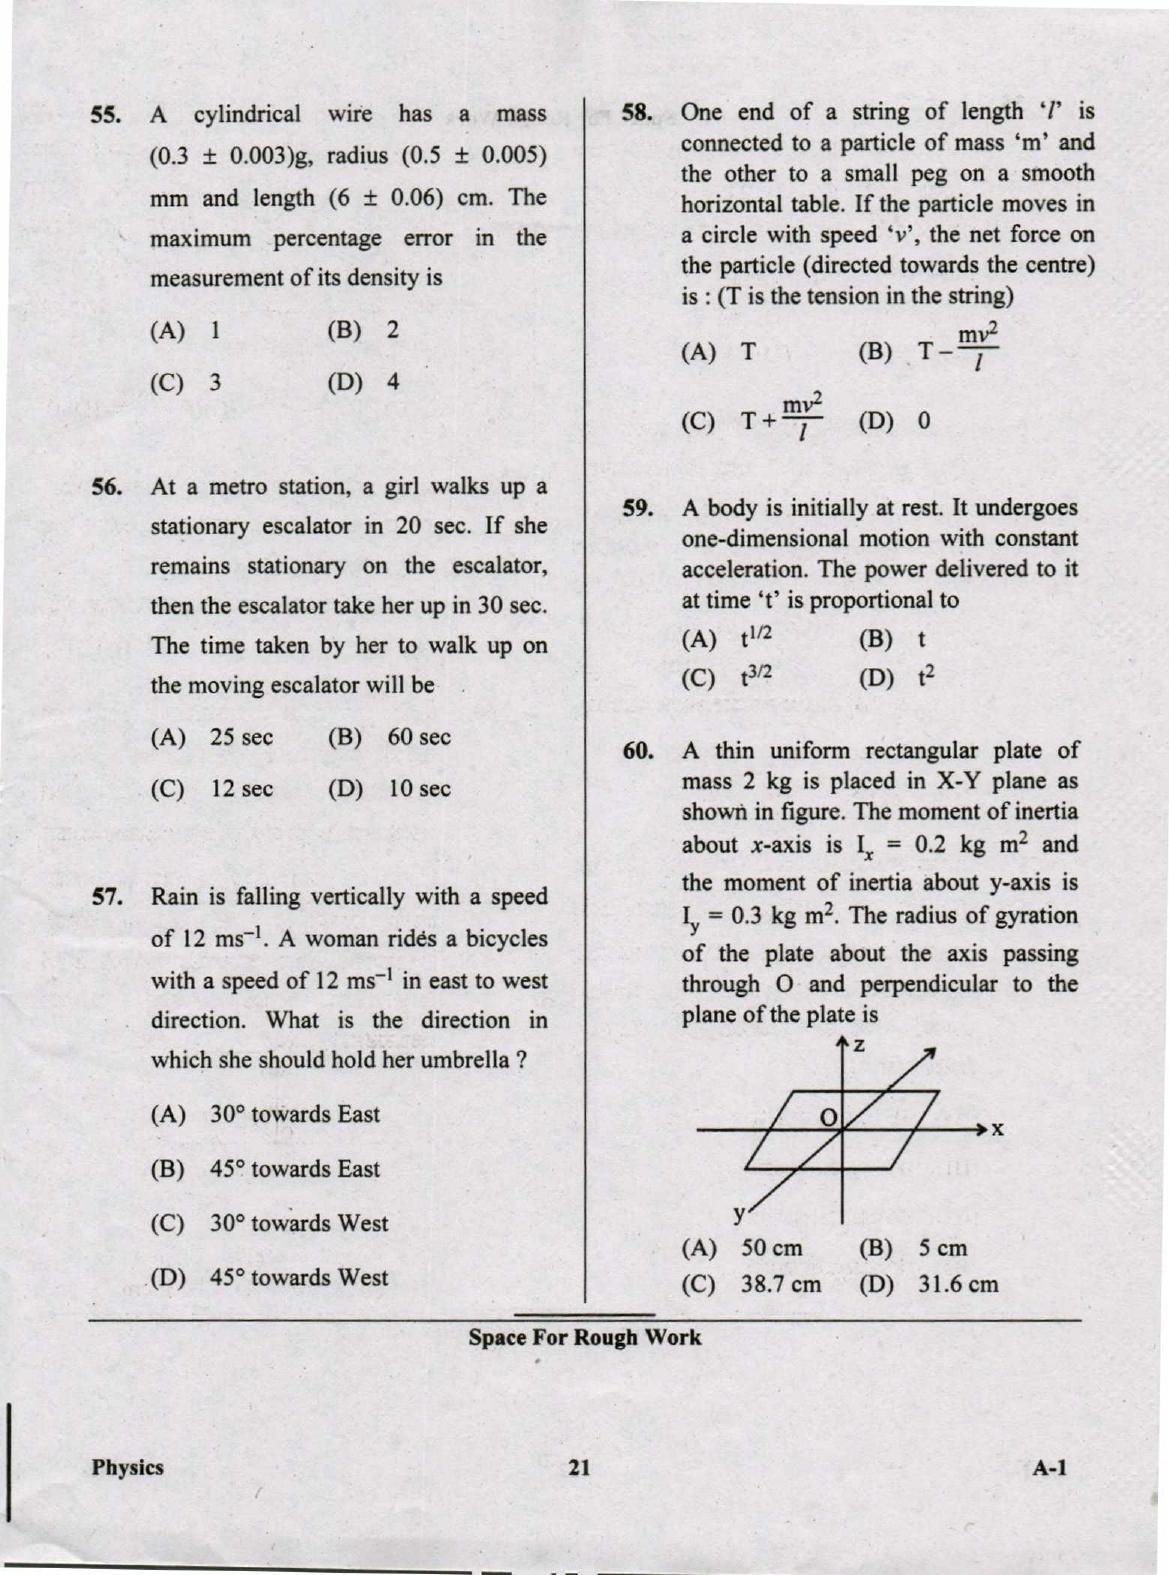 KCET Physics 2020 Question Papers - Page 21